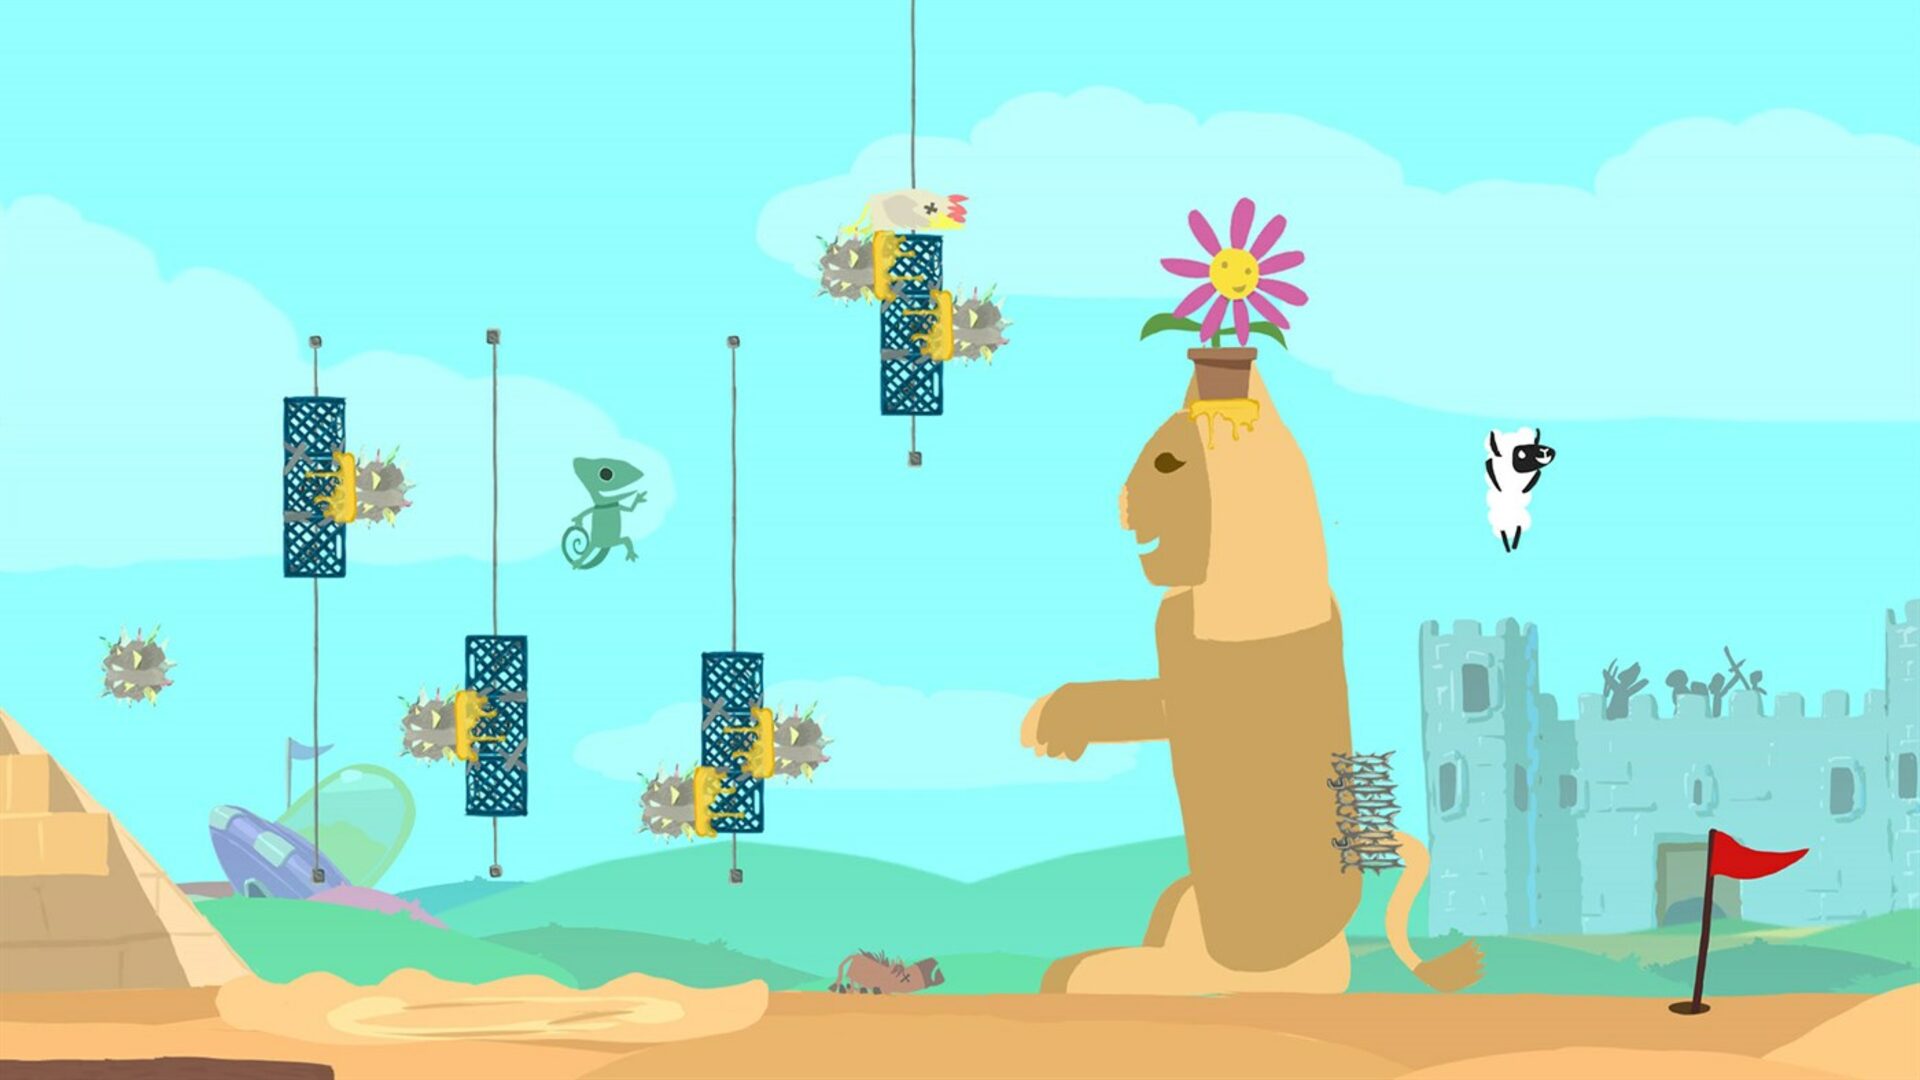 ultimate chicken horse switch local multiplayer